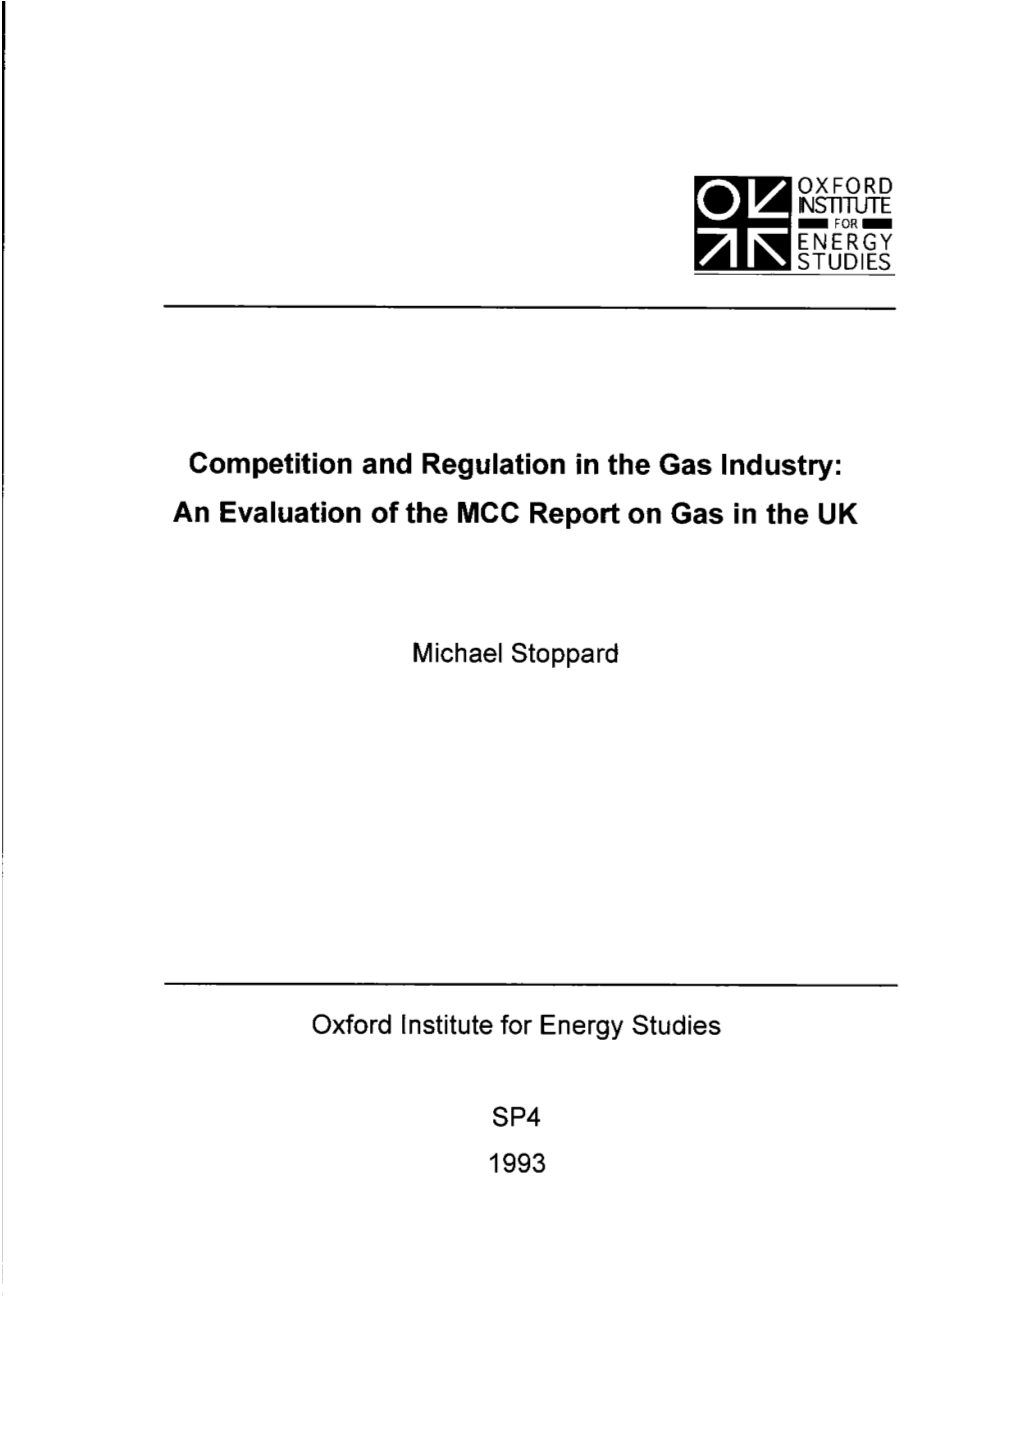 Competition and Regulation in the Gas Industry: an Evaluation of the MCC Report on Gas in the UK